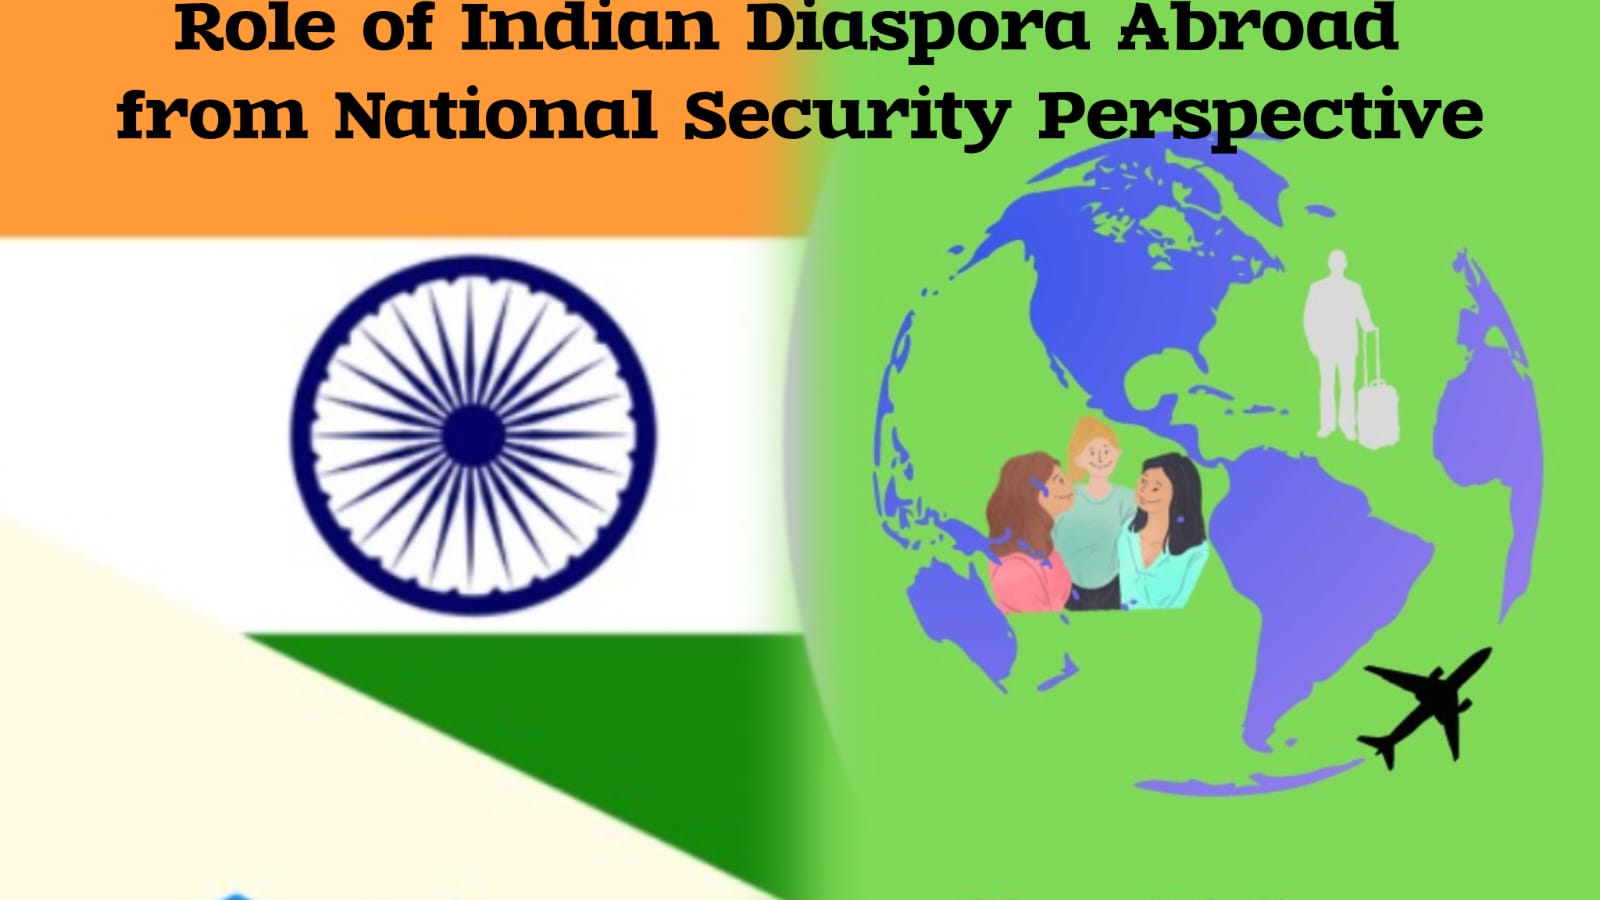 Role of Indian Diaspora Abroad from National Security Perspective  By  Maj Gen AK Chaturvedi, AVSM, VSM (Retd)